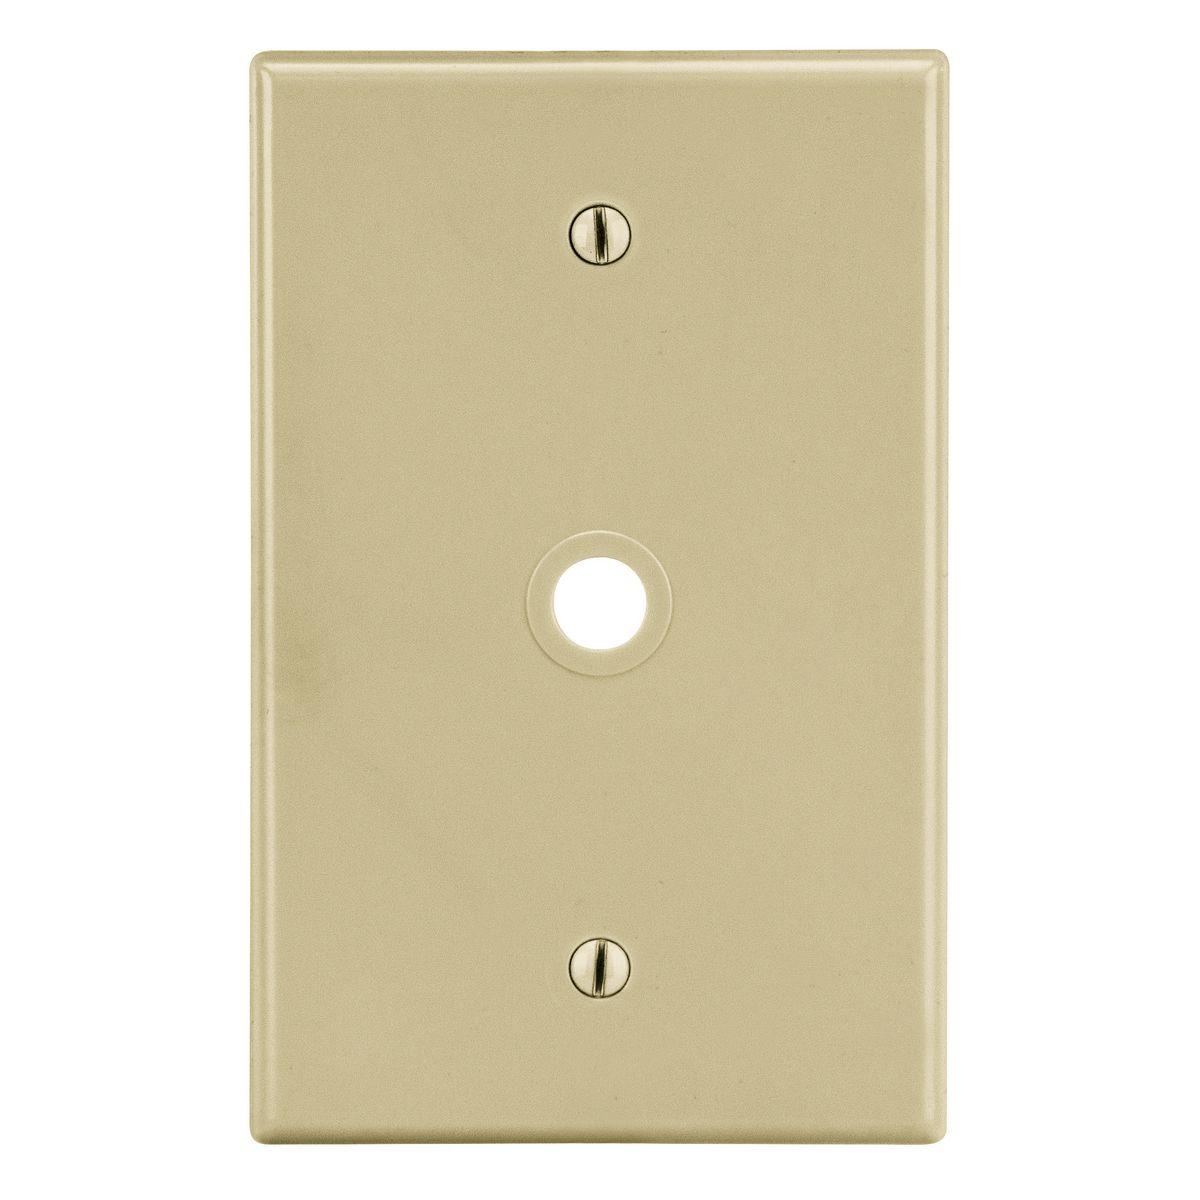 Hubbell PJ11I Wallplate, Mid-Size 1-Gang, .406" Opening, Box Mount,  Ivory  ; High-impact, self-extinguishing polycarbonate material ; More Rigid ; Sharp lines and less dimpling ; Smooth satin finish ; Blends into wall with an optimum finish ; Smooth Satin Finish